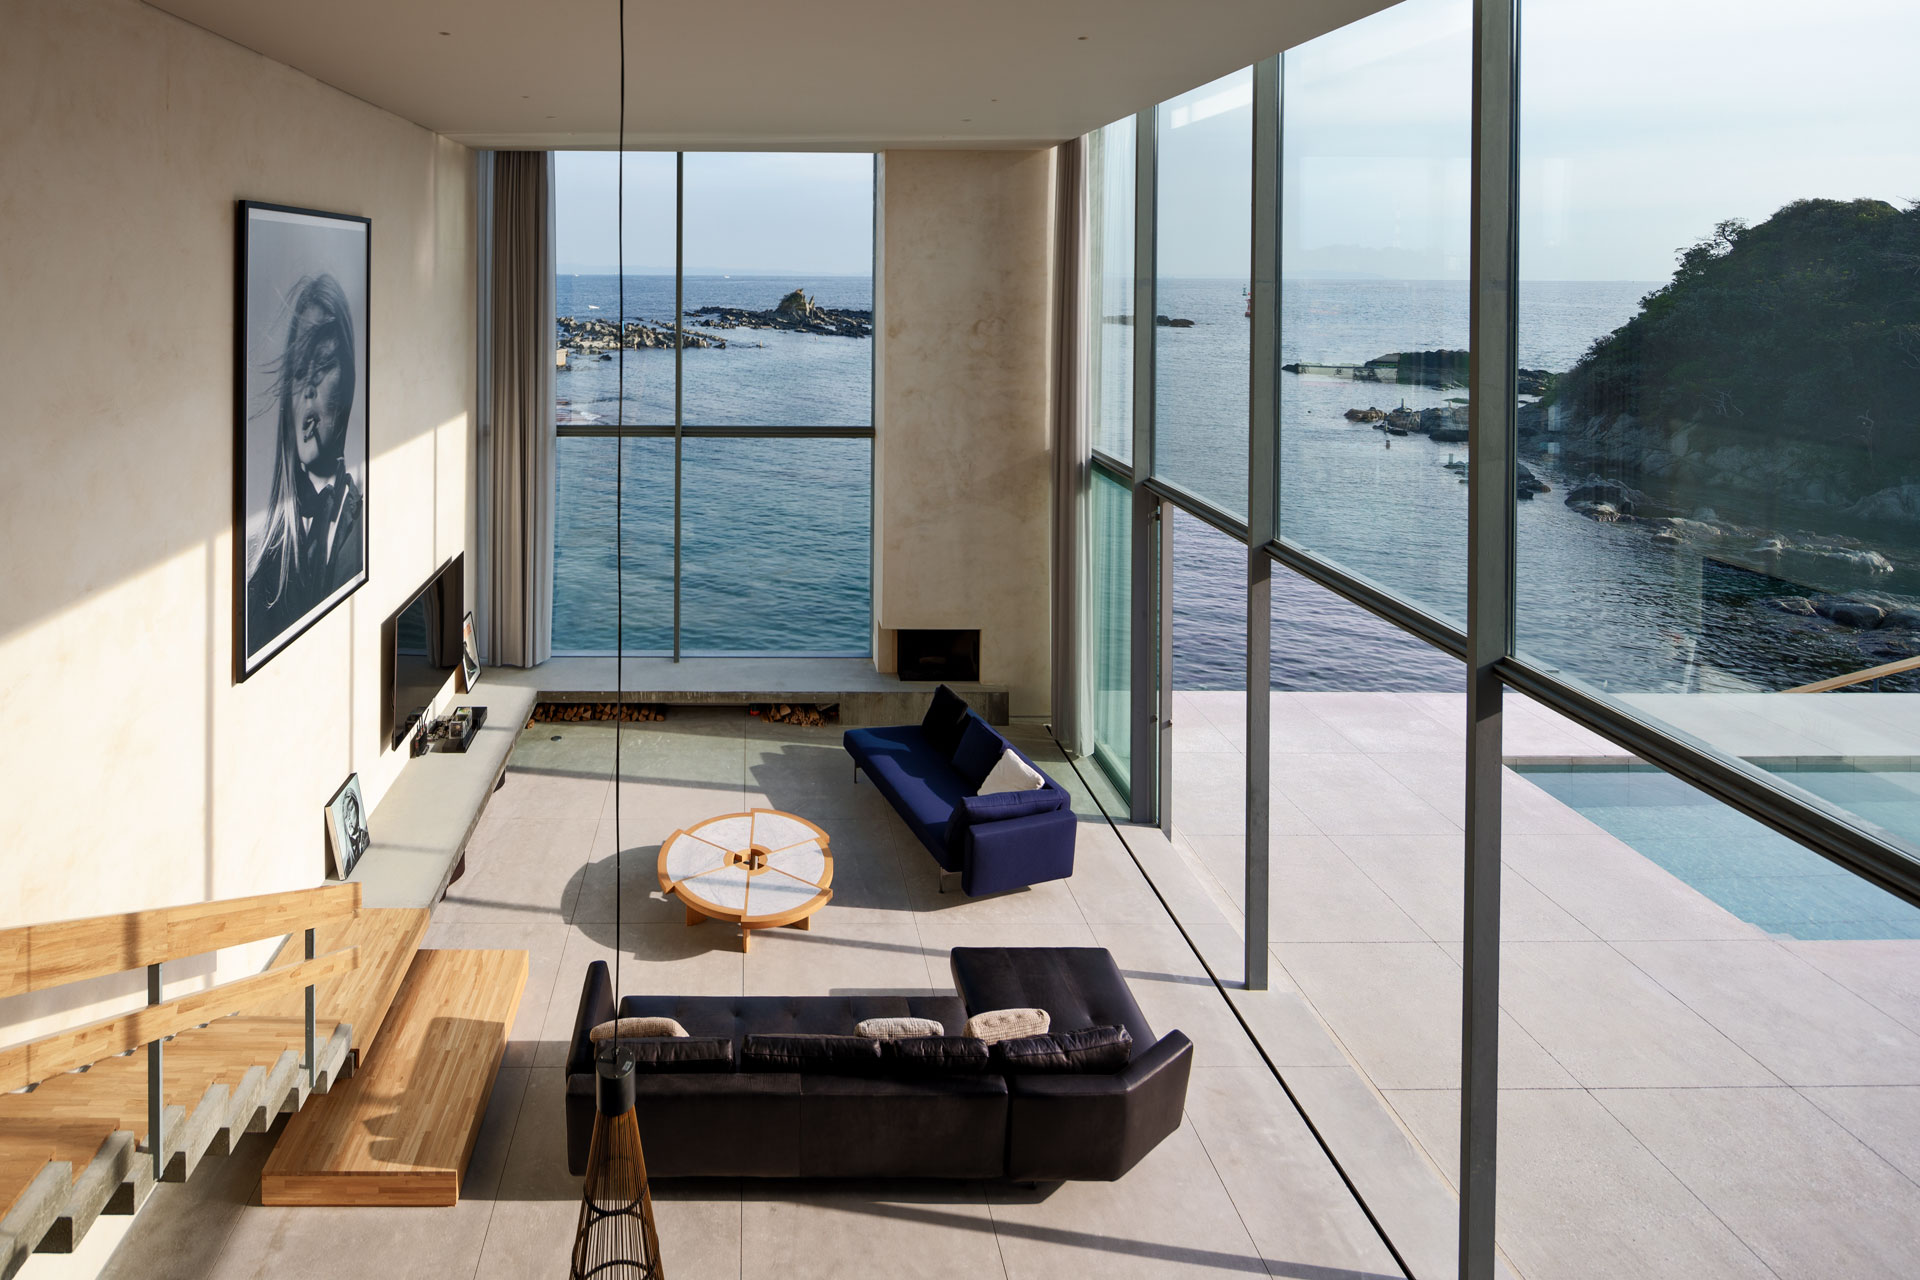 Peninsula house, a japanese interior that looks out from floor to ceiling glass windows onto Mount Fuji